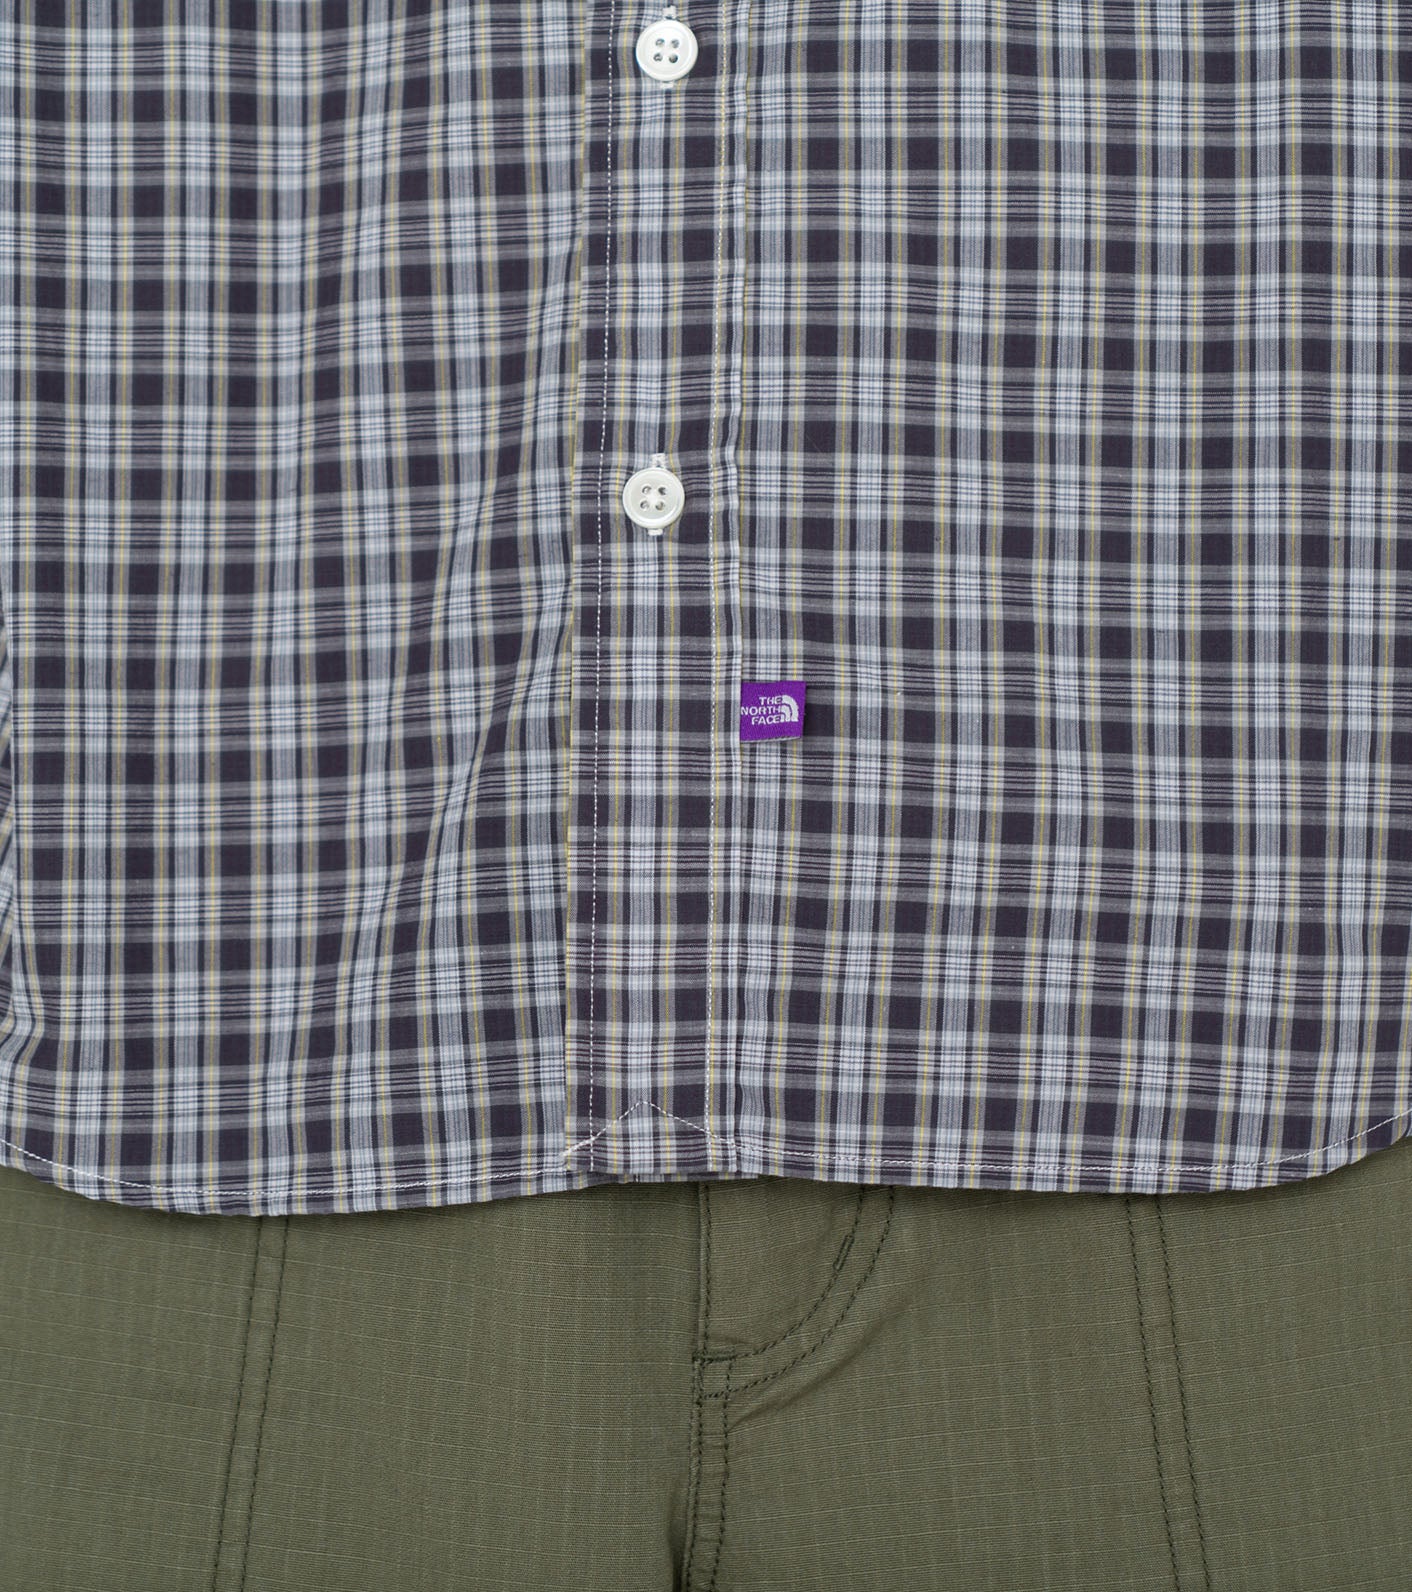 THE NORTH FACE PURPLE LABEL Button Down Plaid Field Shirt